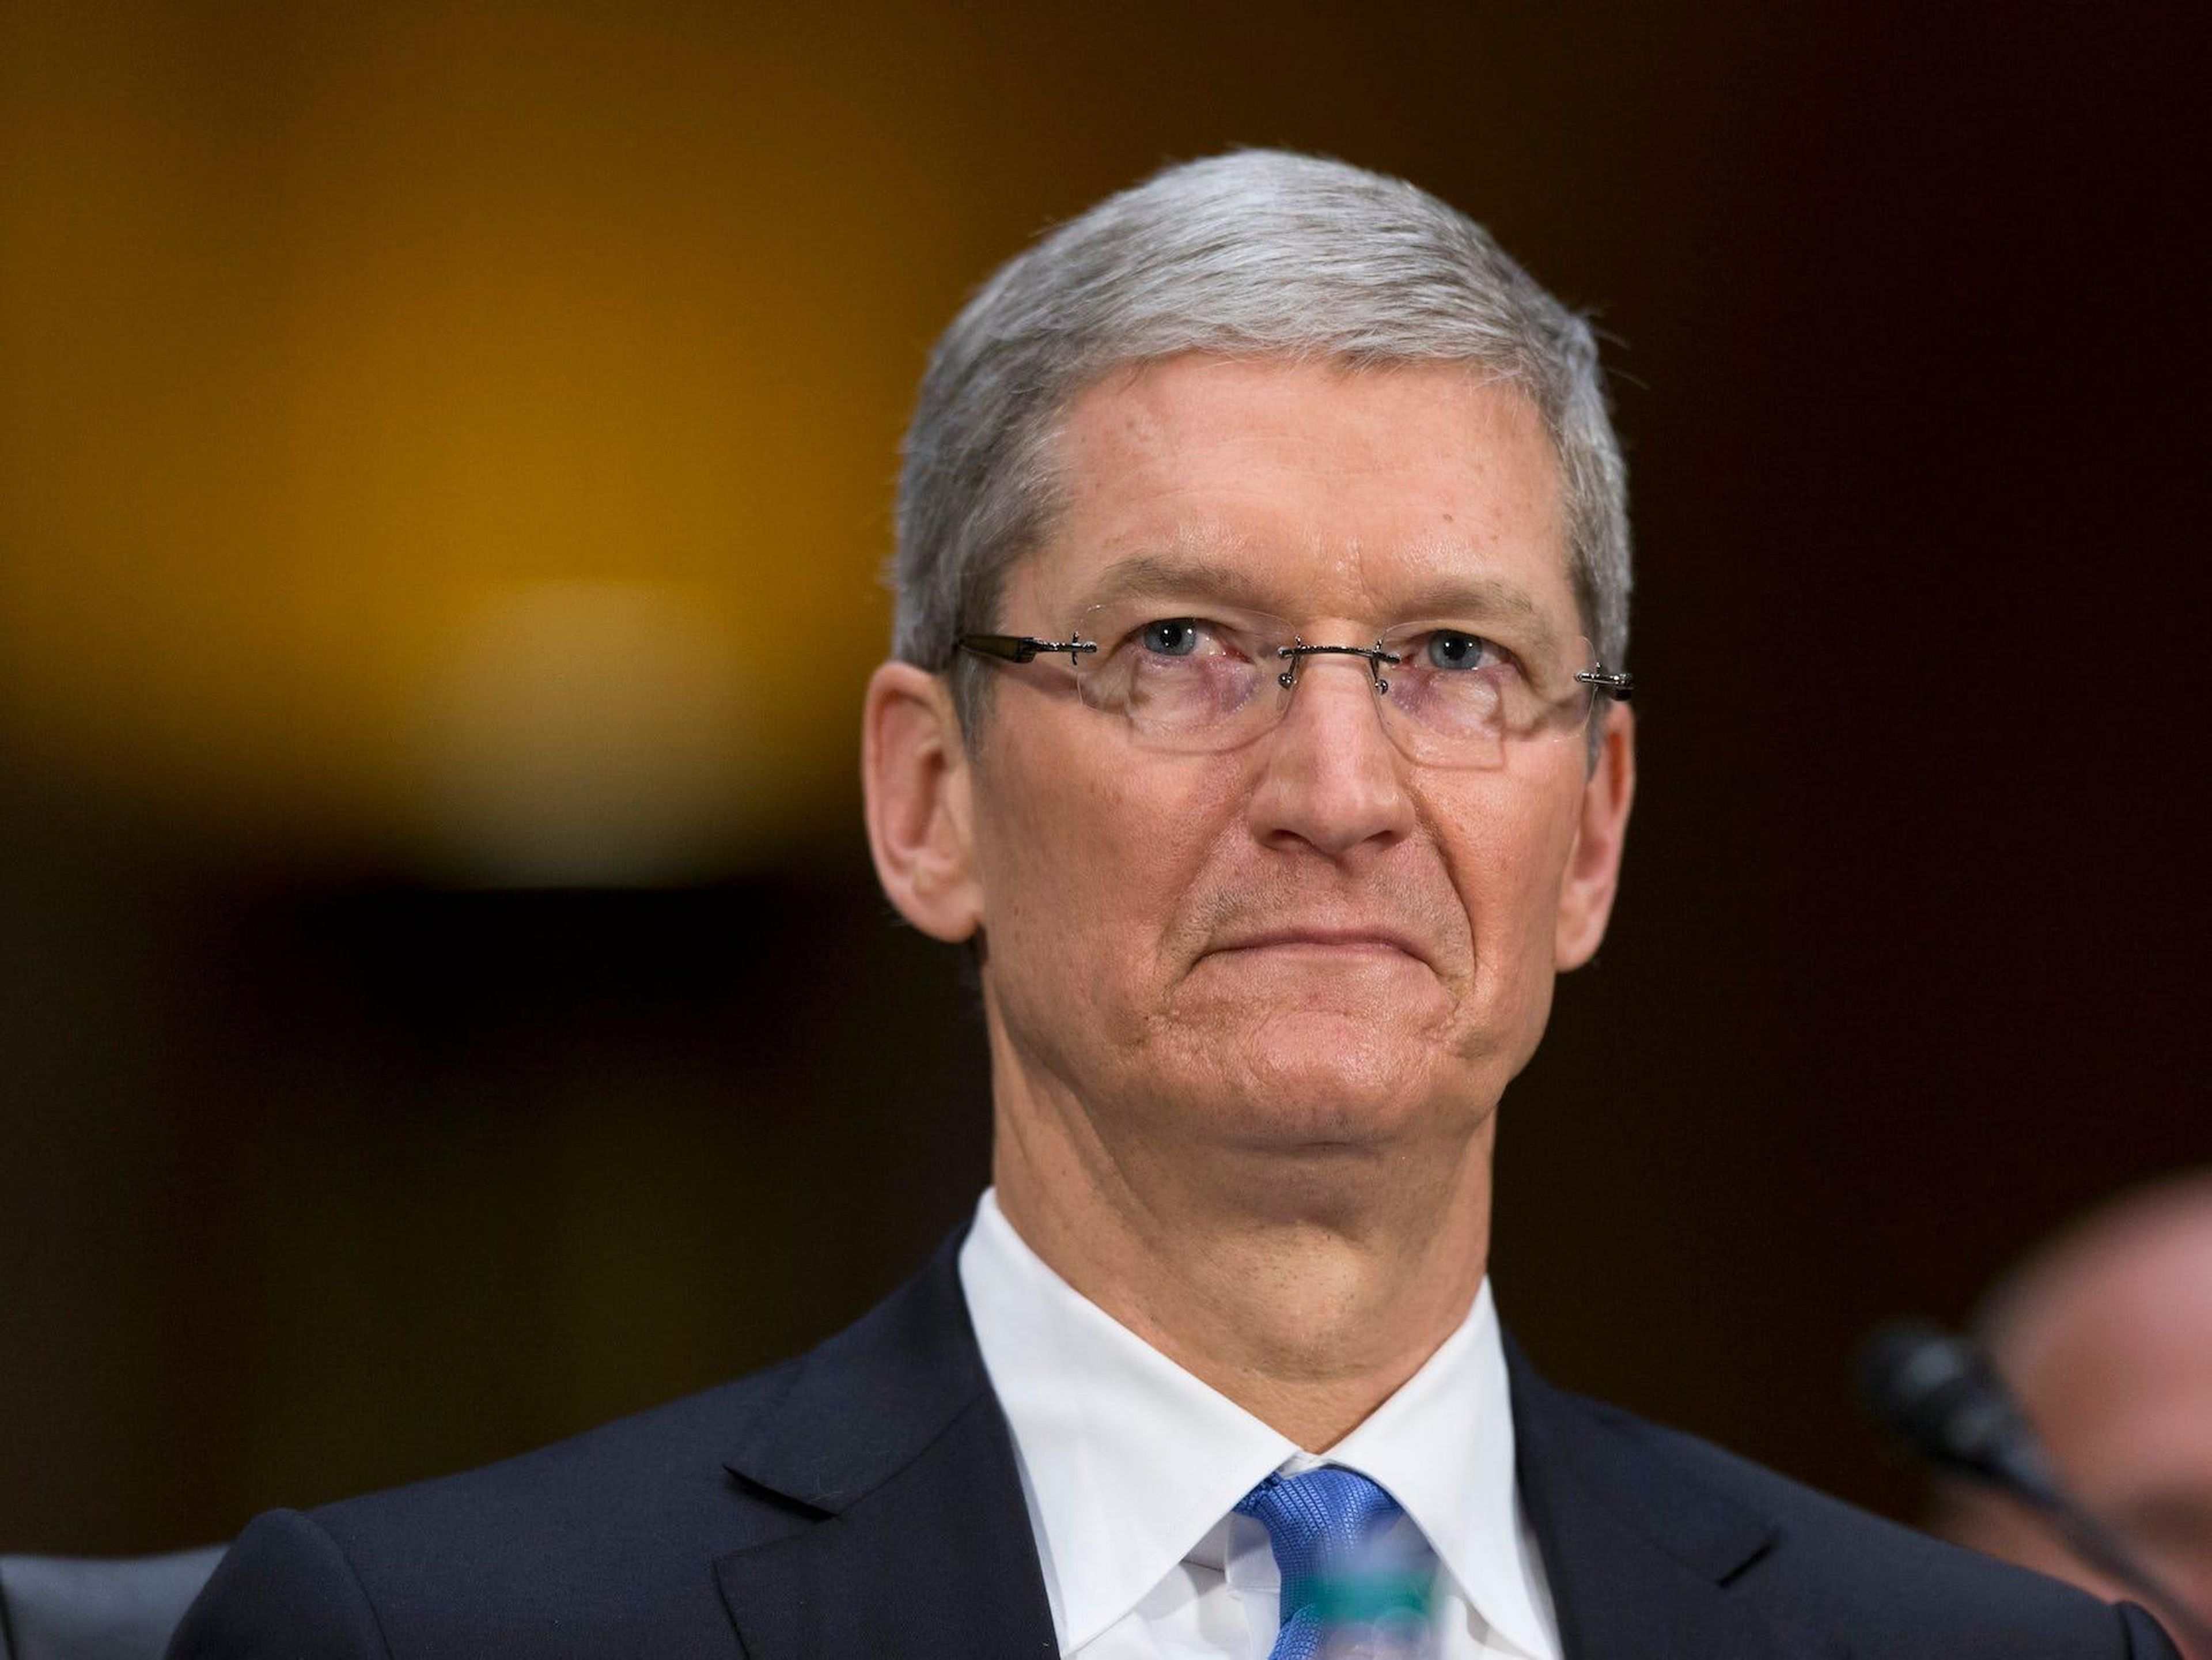 Apple CEO Tim Cook. Under the proposed settlement, Apple would pay $25 per iPhone, but admit no wrongdoing in a scandal that has become known as "batterygate."